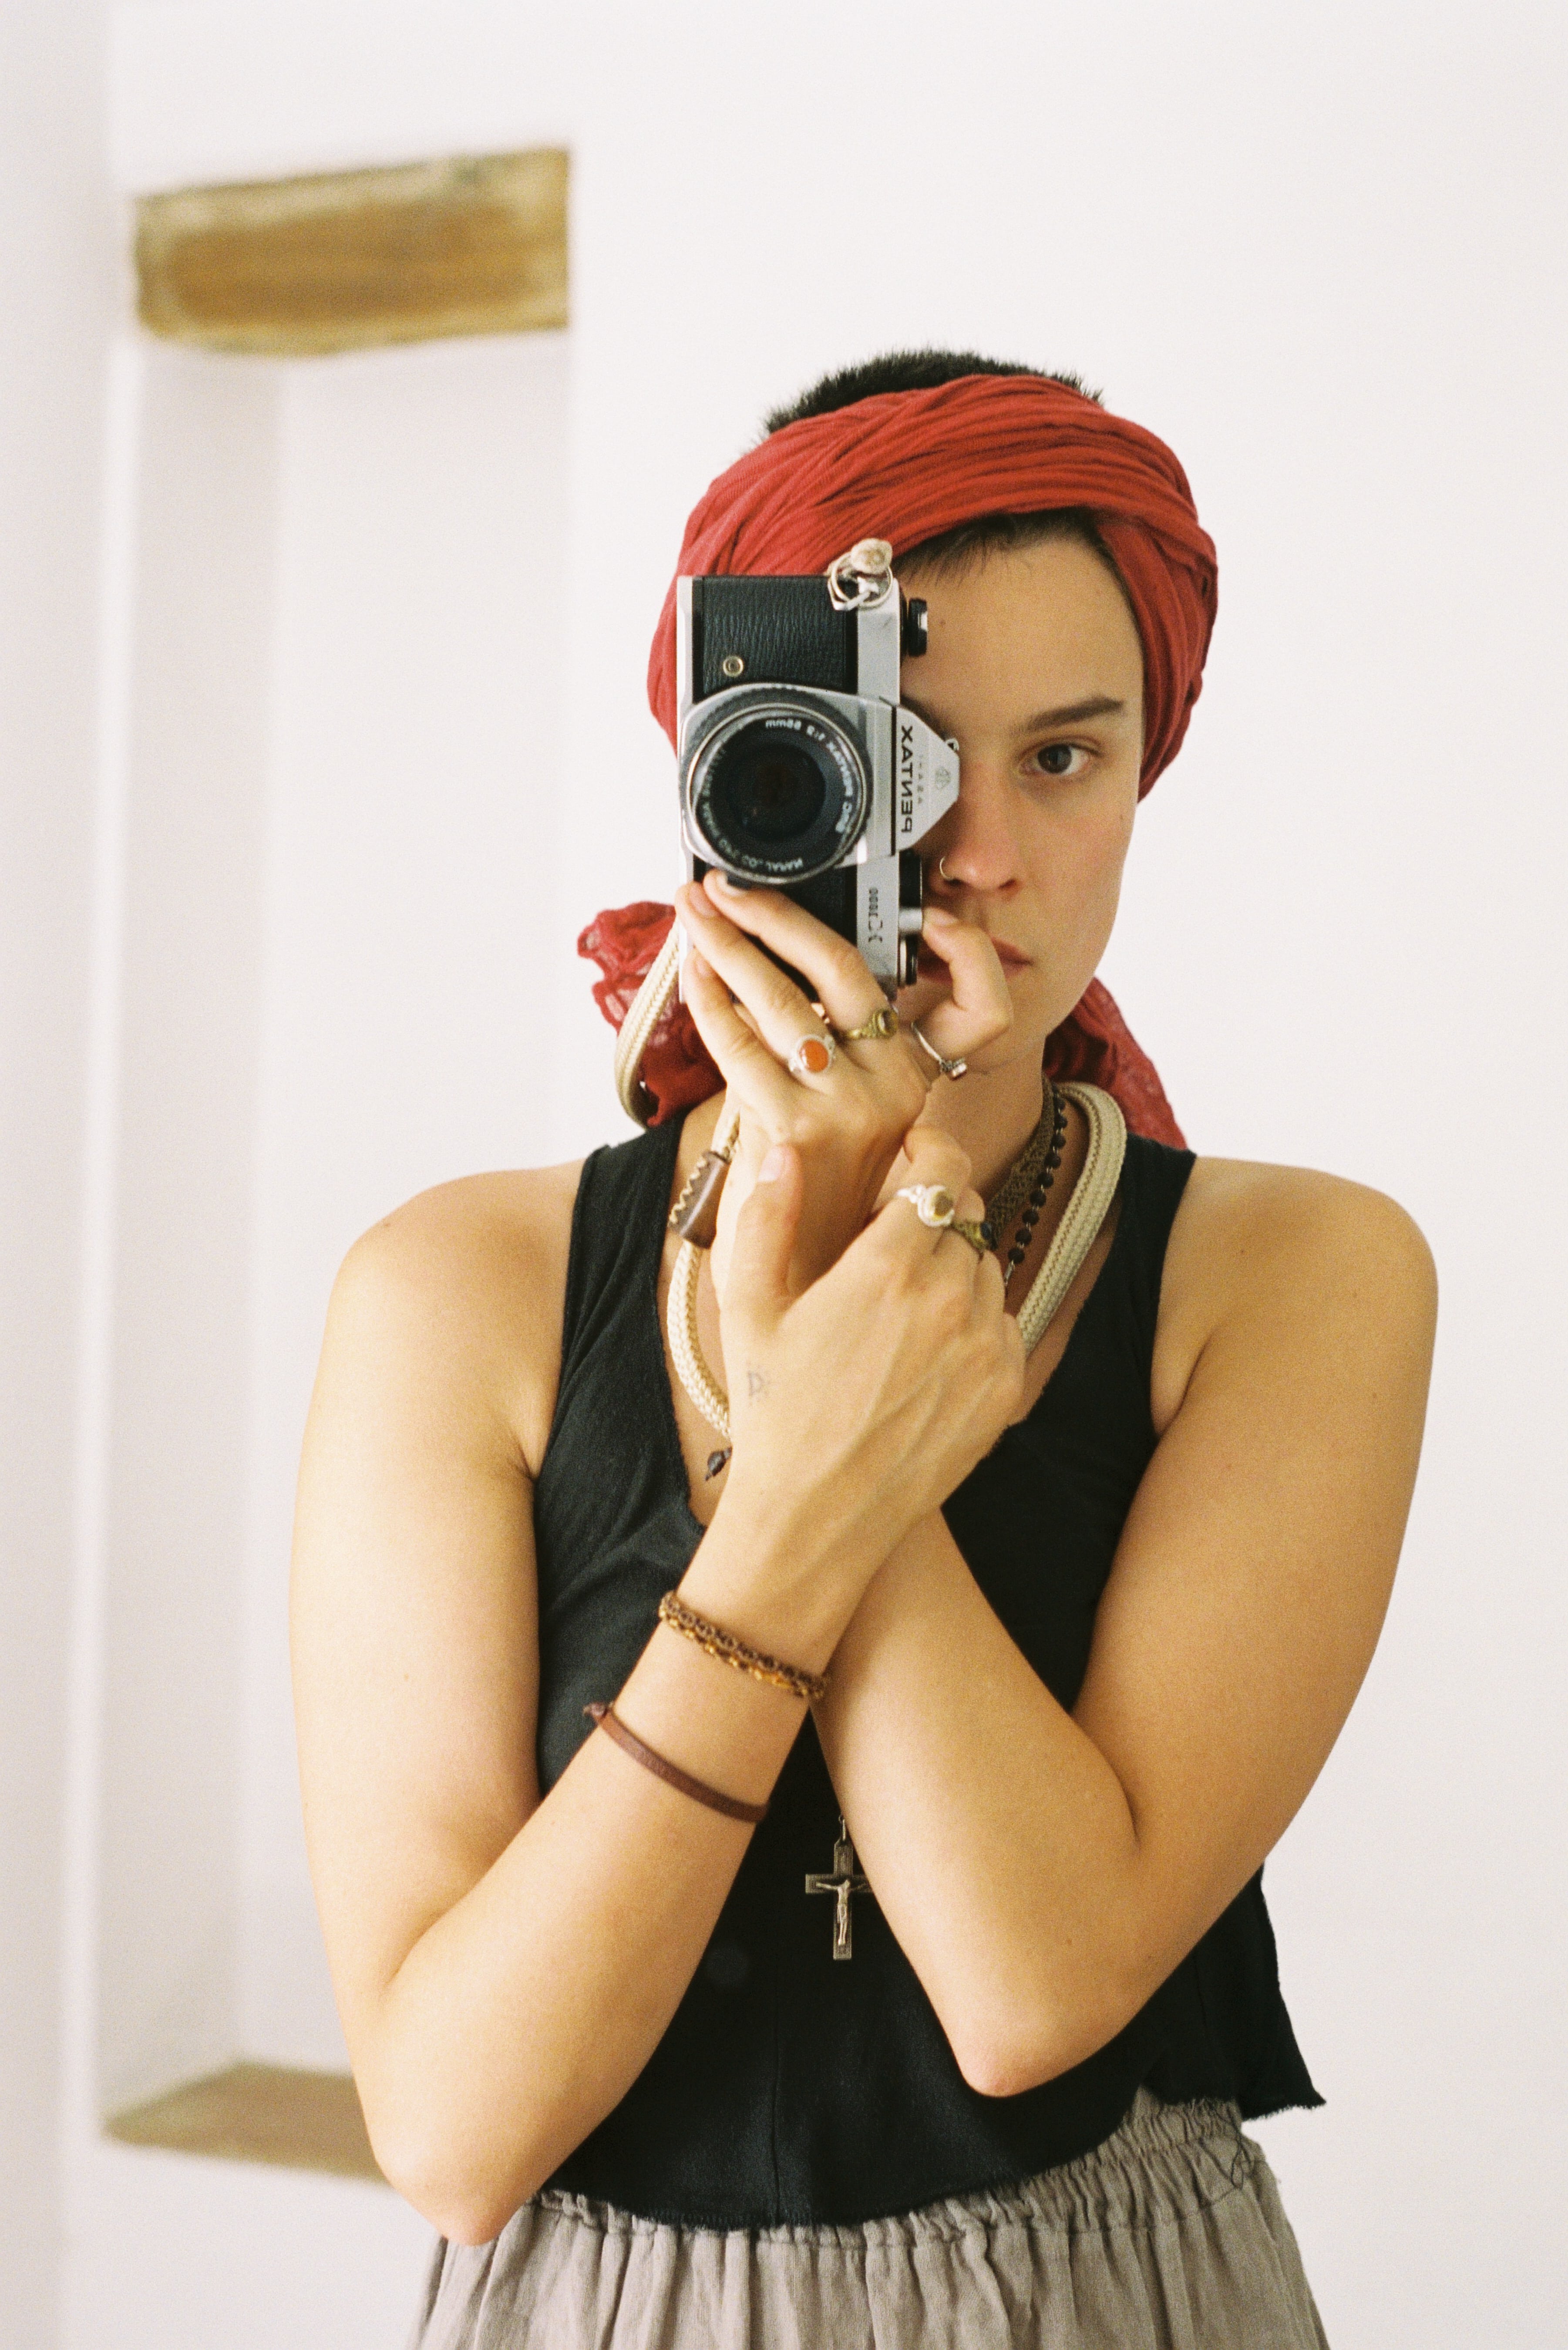 Self portrait of girl with film camera